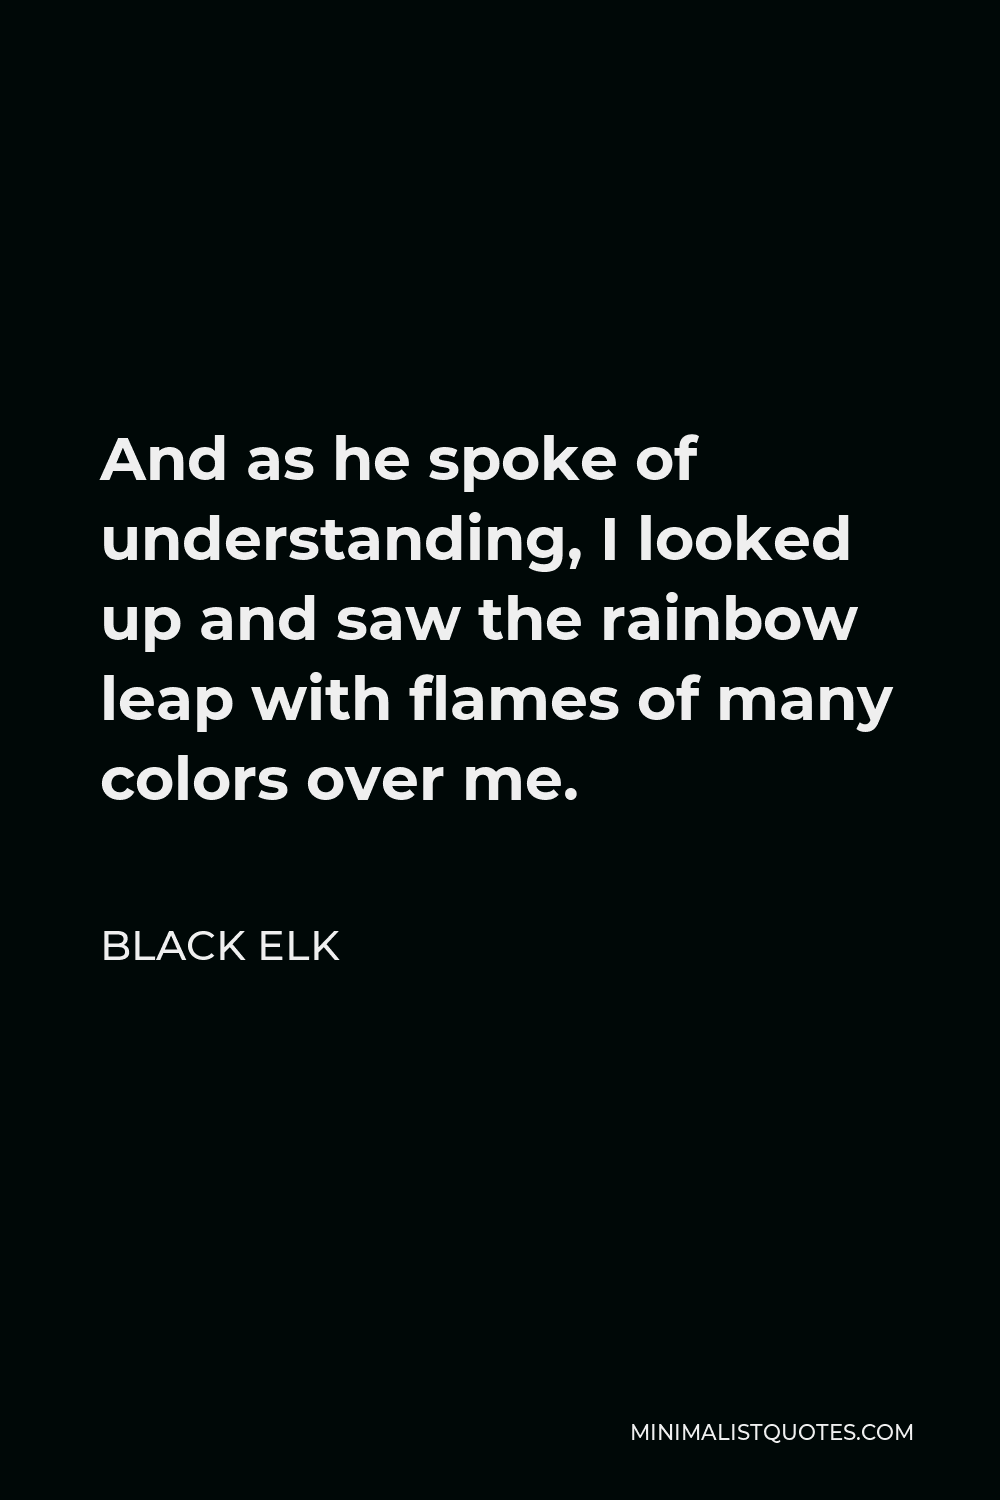 Black Elk Quote - And as he spoke of understanding, I looked up and saw the rainbow leap with flames of many colors over me.